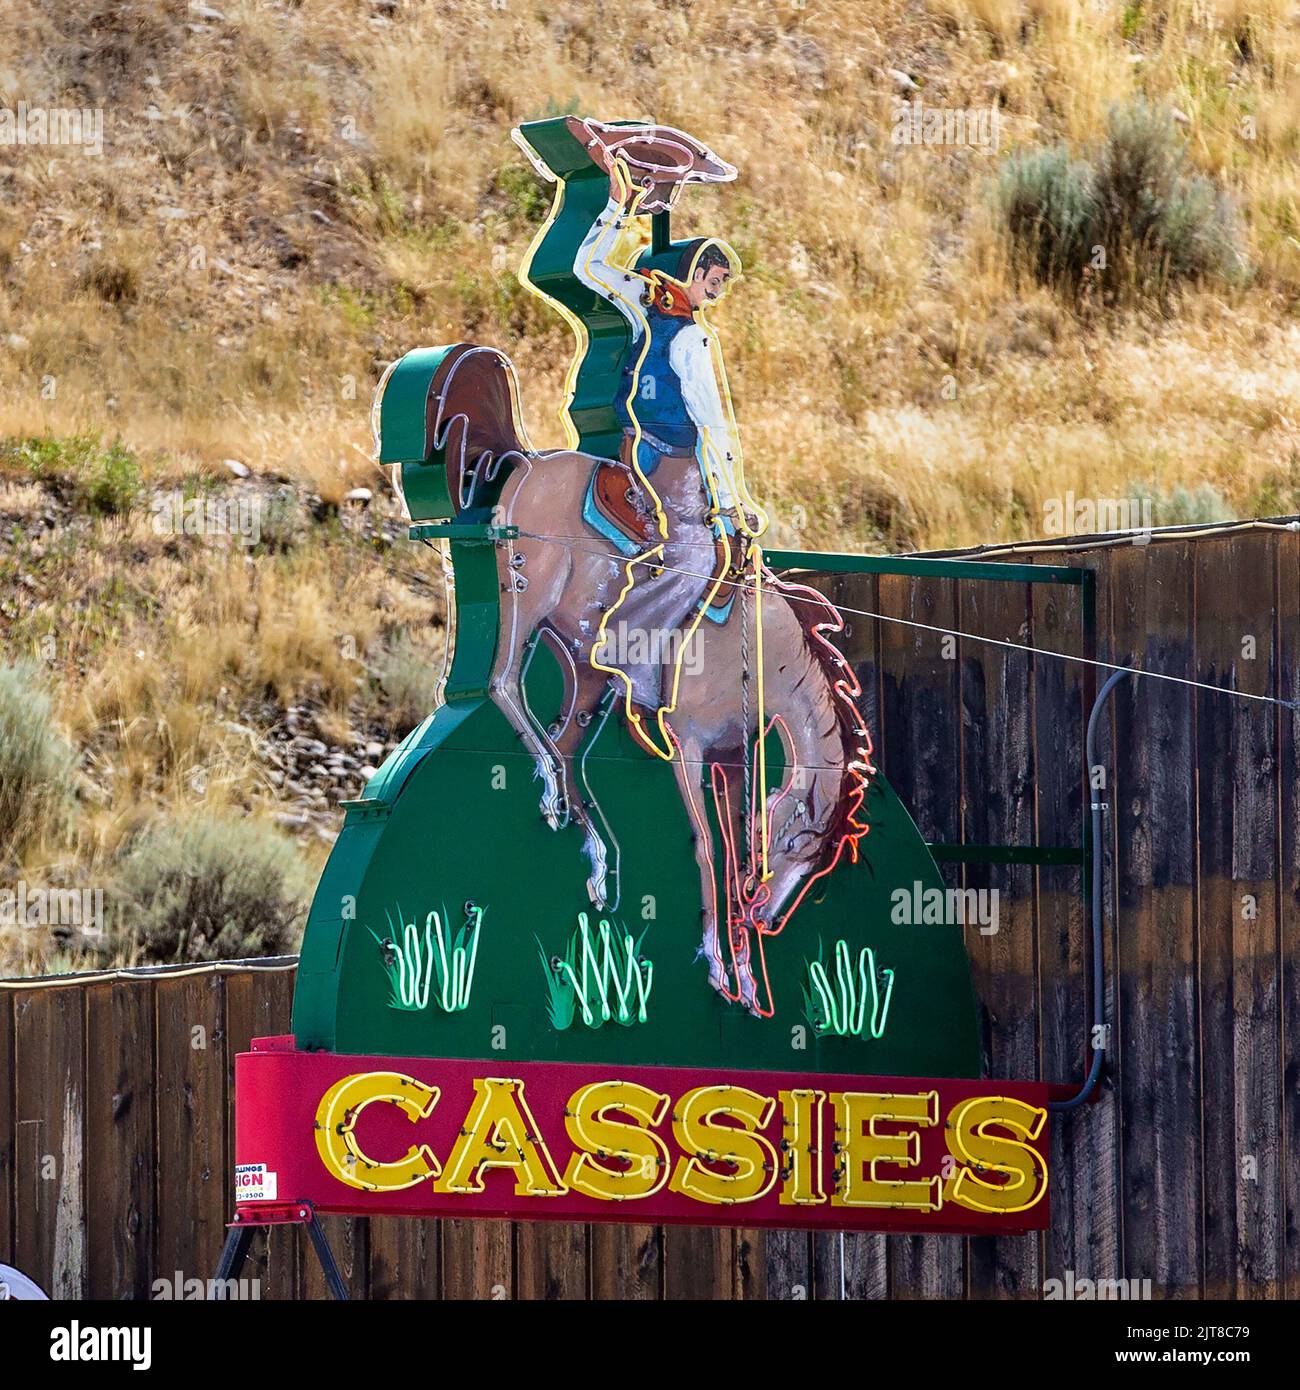 Roadside neon sign of a bucking bronco and cowboy for Cassie’s Bar and Lounge in Cody, Wyoming. Stock Photo